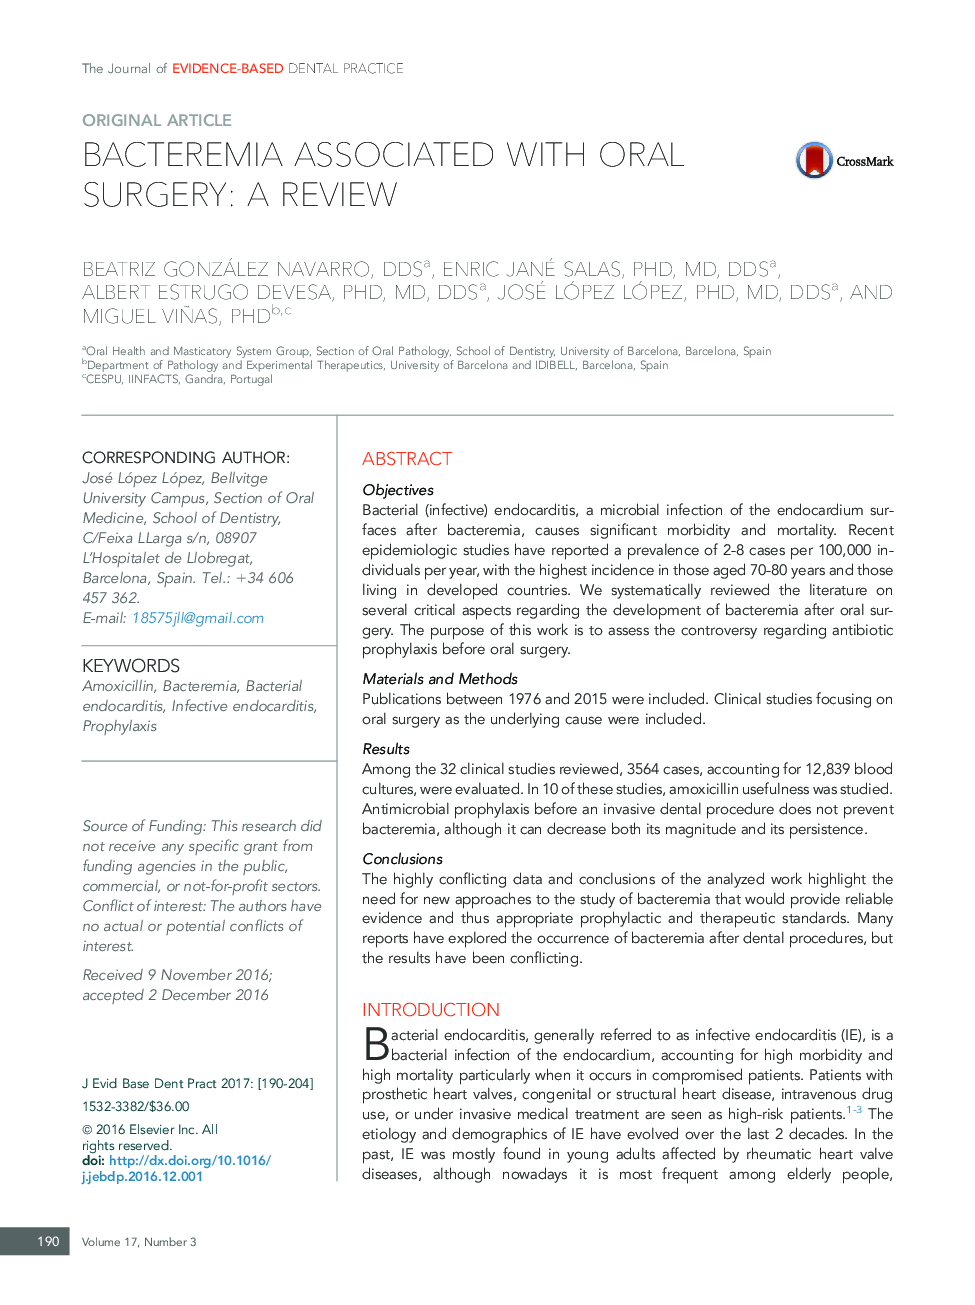 Bacteremia Associated With Oral Surgery: AÂ Review